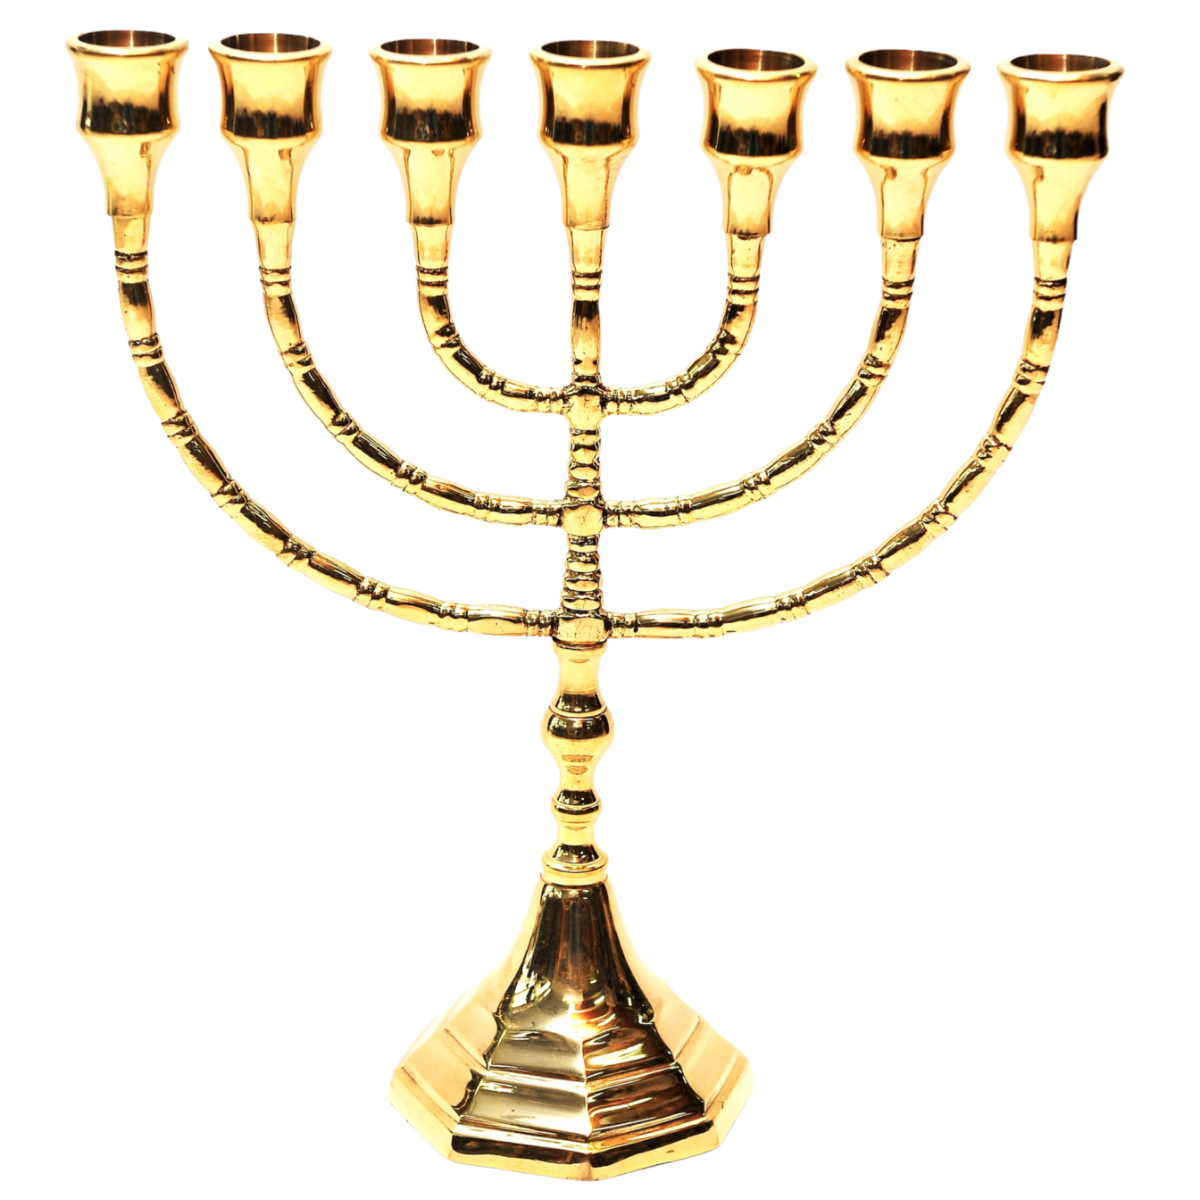 Menorah Gold Plated Temple Candle Holder Judaica 12 ″